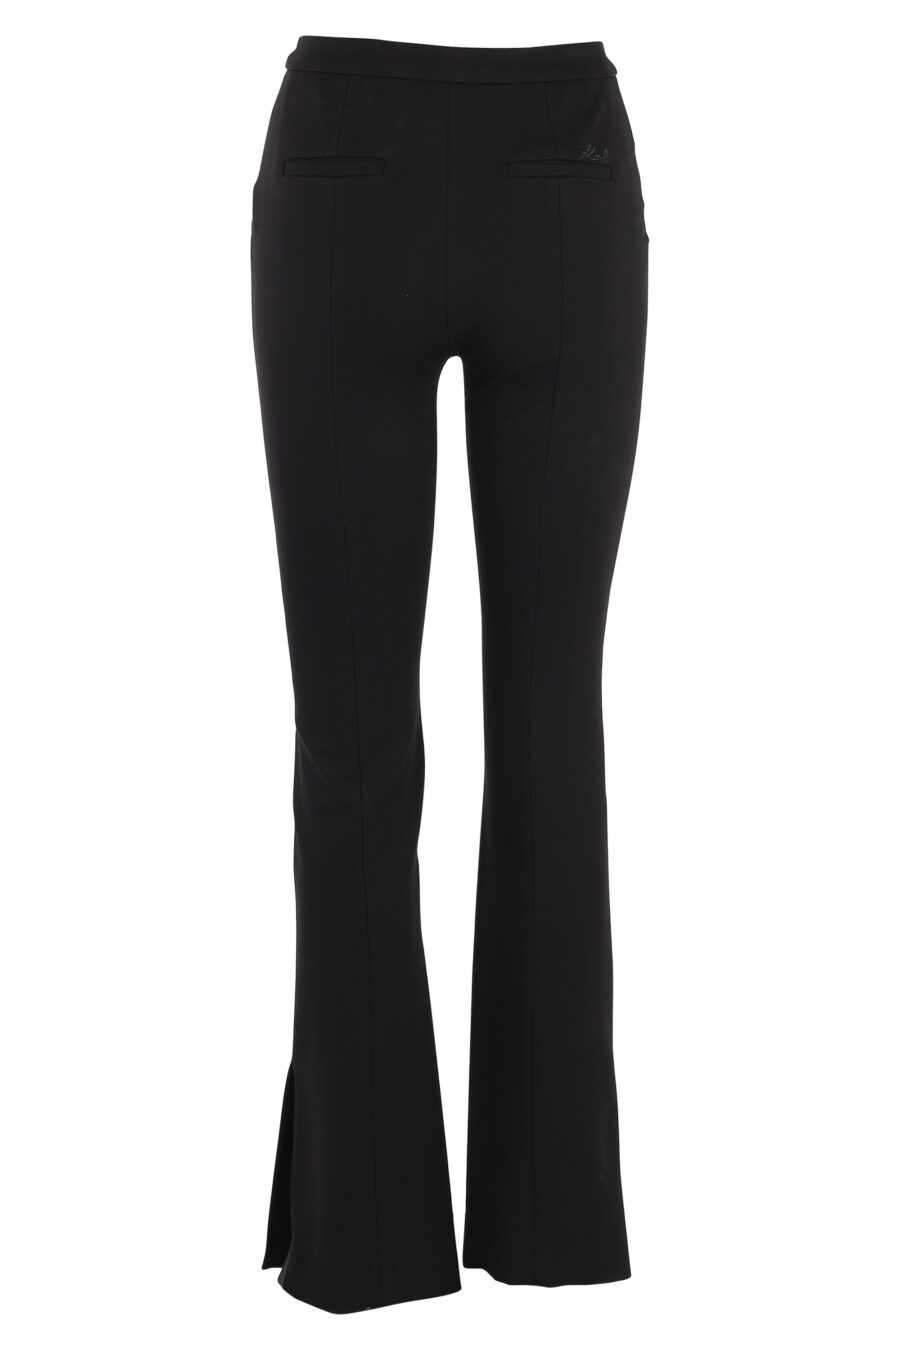 Black trousers with slit and ribbon logo - IMG 5098